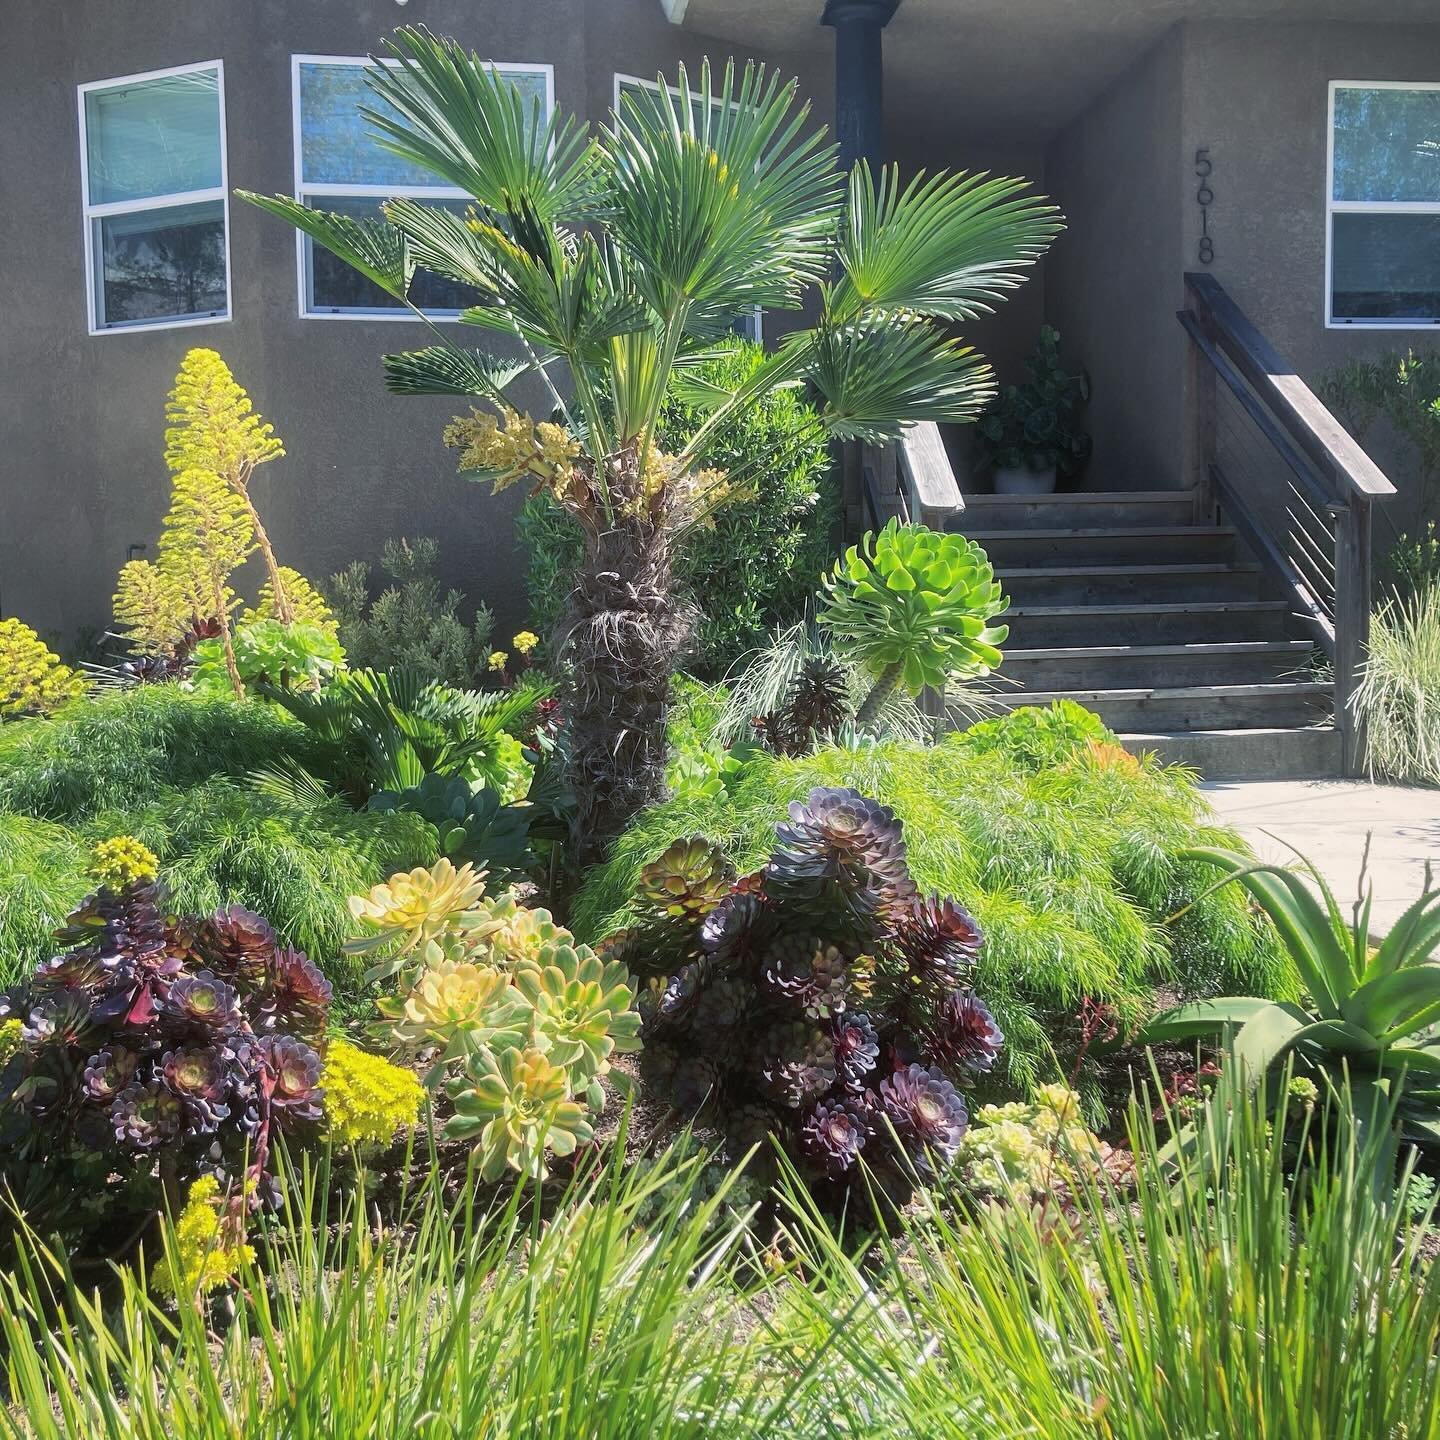 Front yard rework I did a couple years ago for some lovely maintenance clients. We decided to use a red, gold and green color scheme on this one.
.
.
.
.

.
.
#terracottatropic #santacruzgardendesign #trachycarpus #leucadendronjester